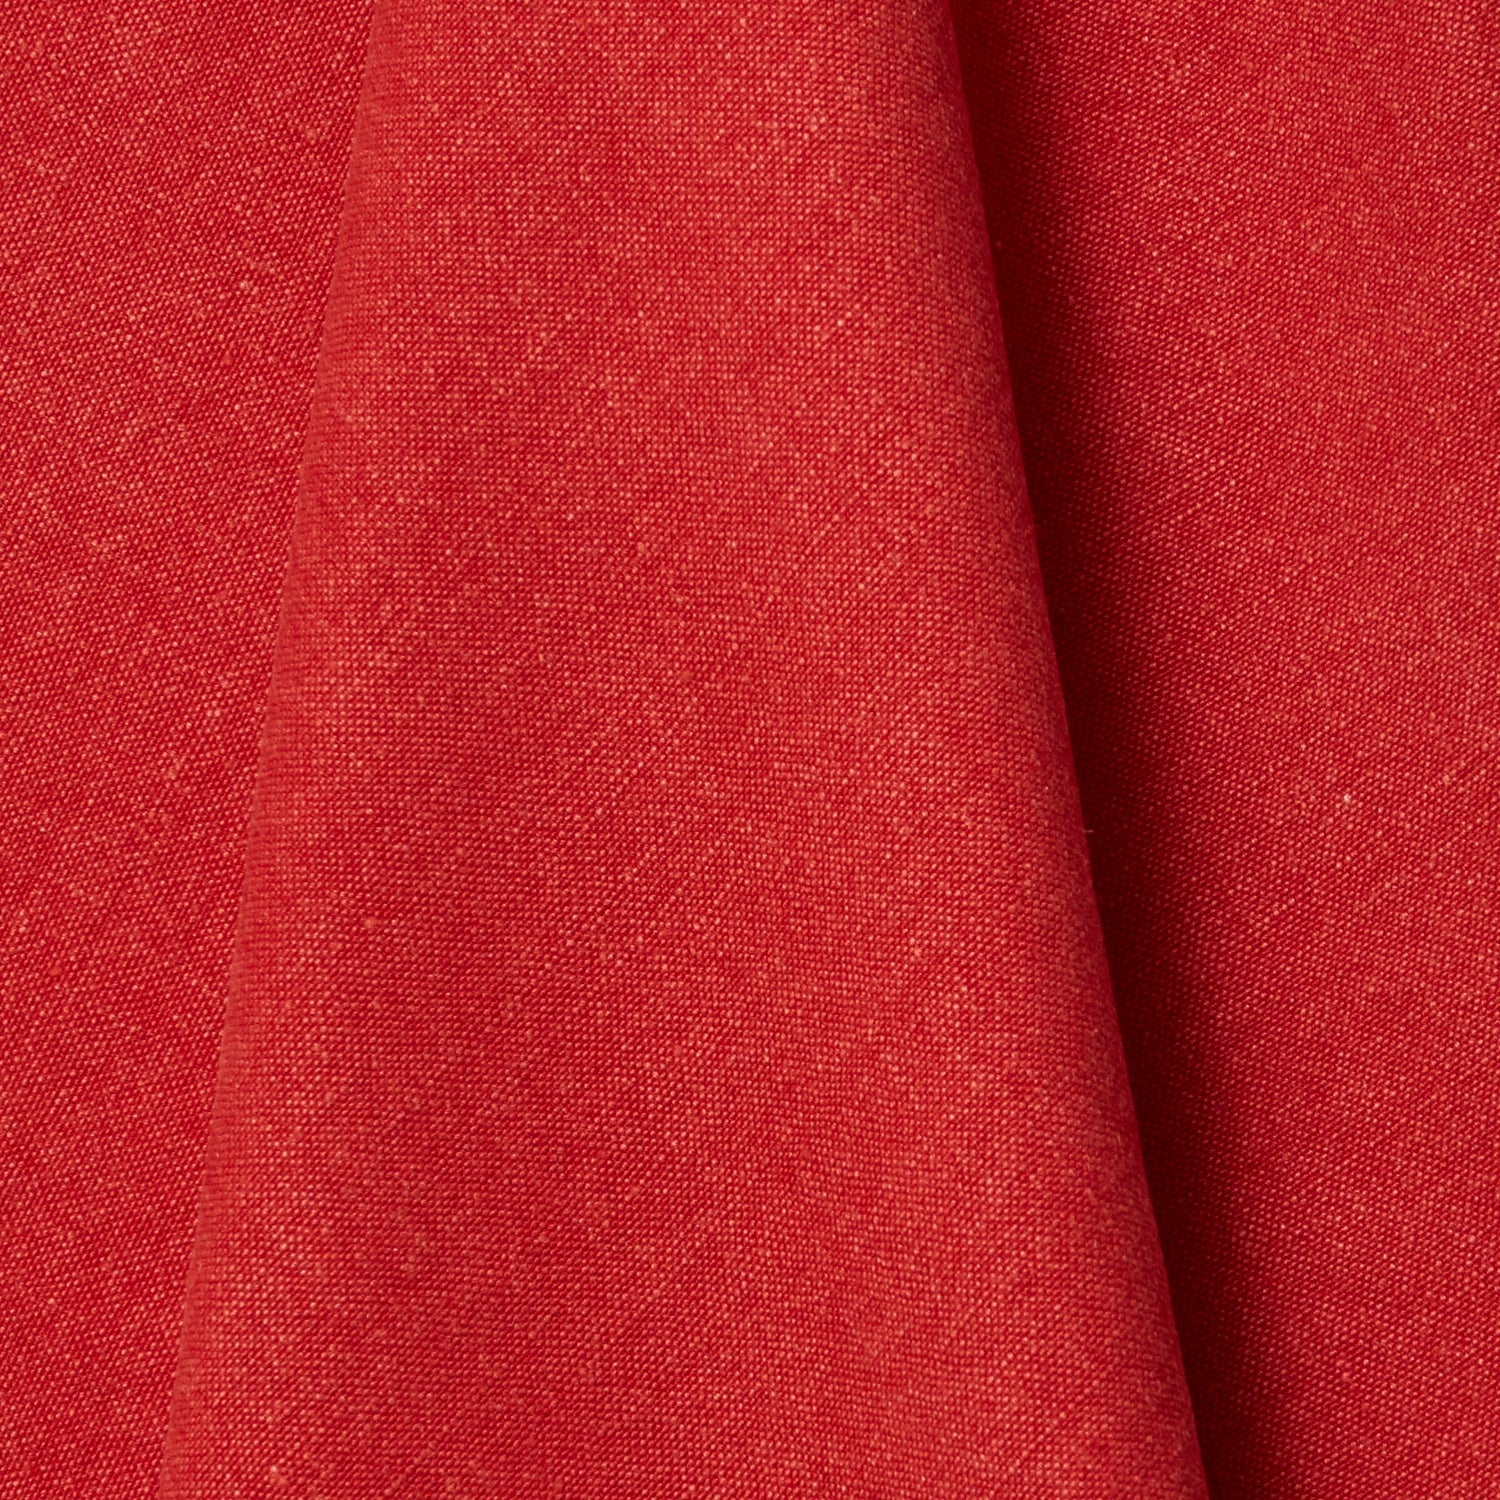 A draped swatch of linen fabric in a solid red color.